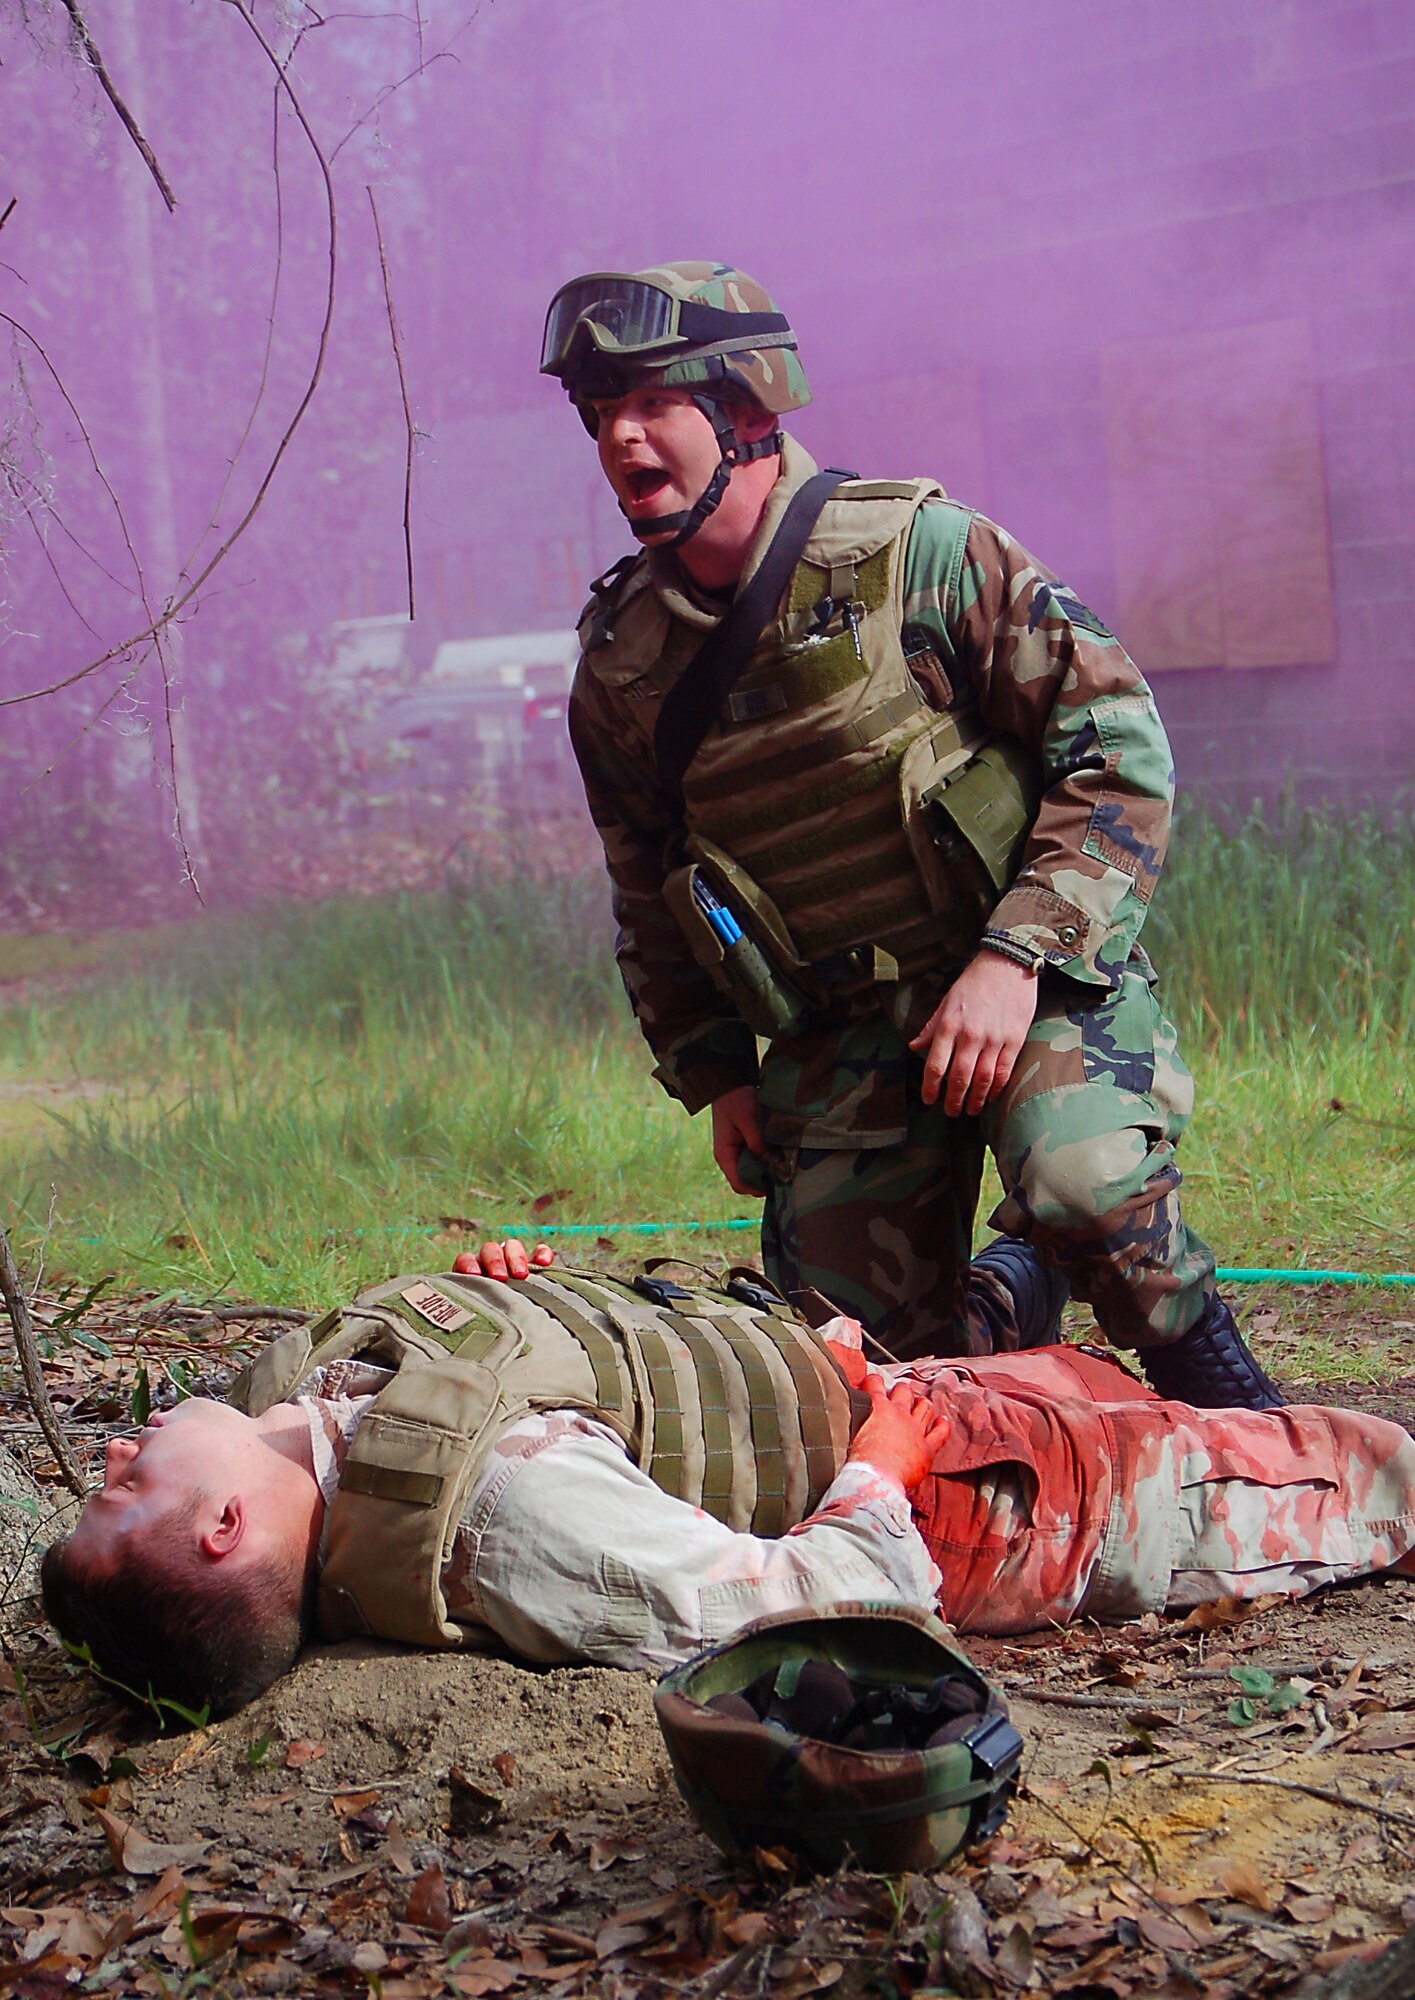 Airman 1st Class Evan Due, 823rd Security forces fire team member, provides first aid to a mock casualty during a combat medical skills excercise held Jan. 19 Moody Air Force Base, Ga. (U.S. Air Force photo by Tech. Sgt. Parker Gyokeres)